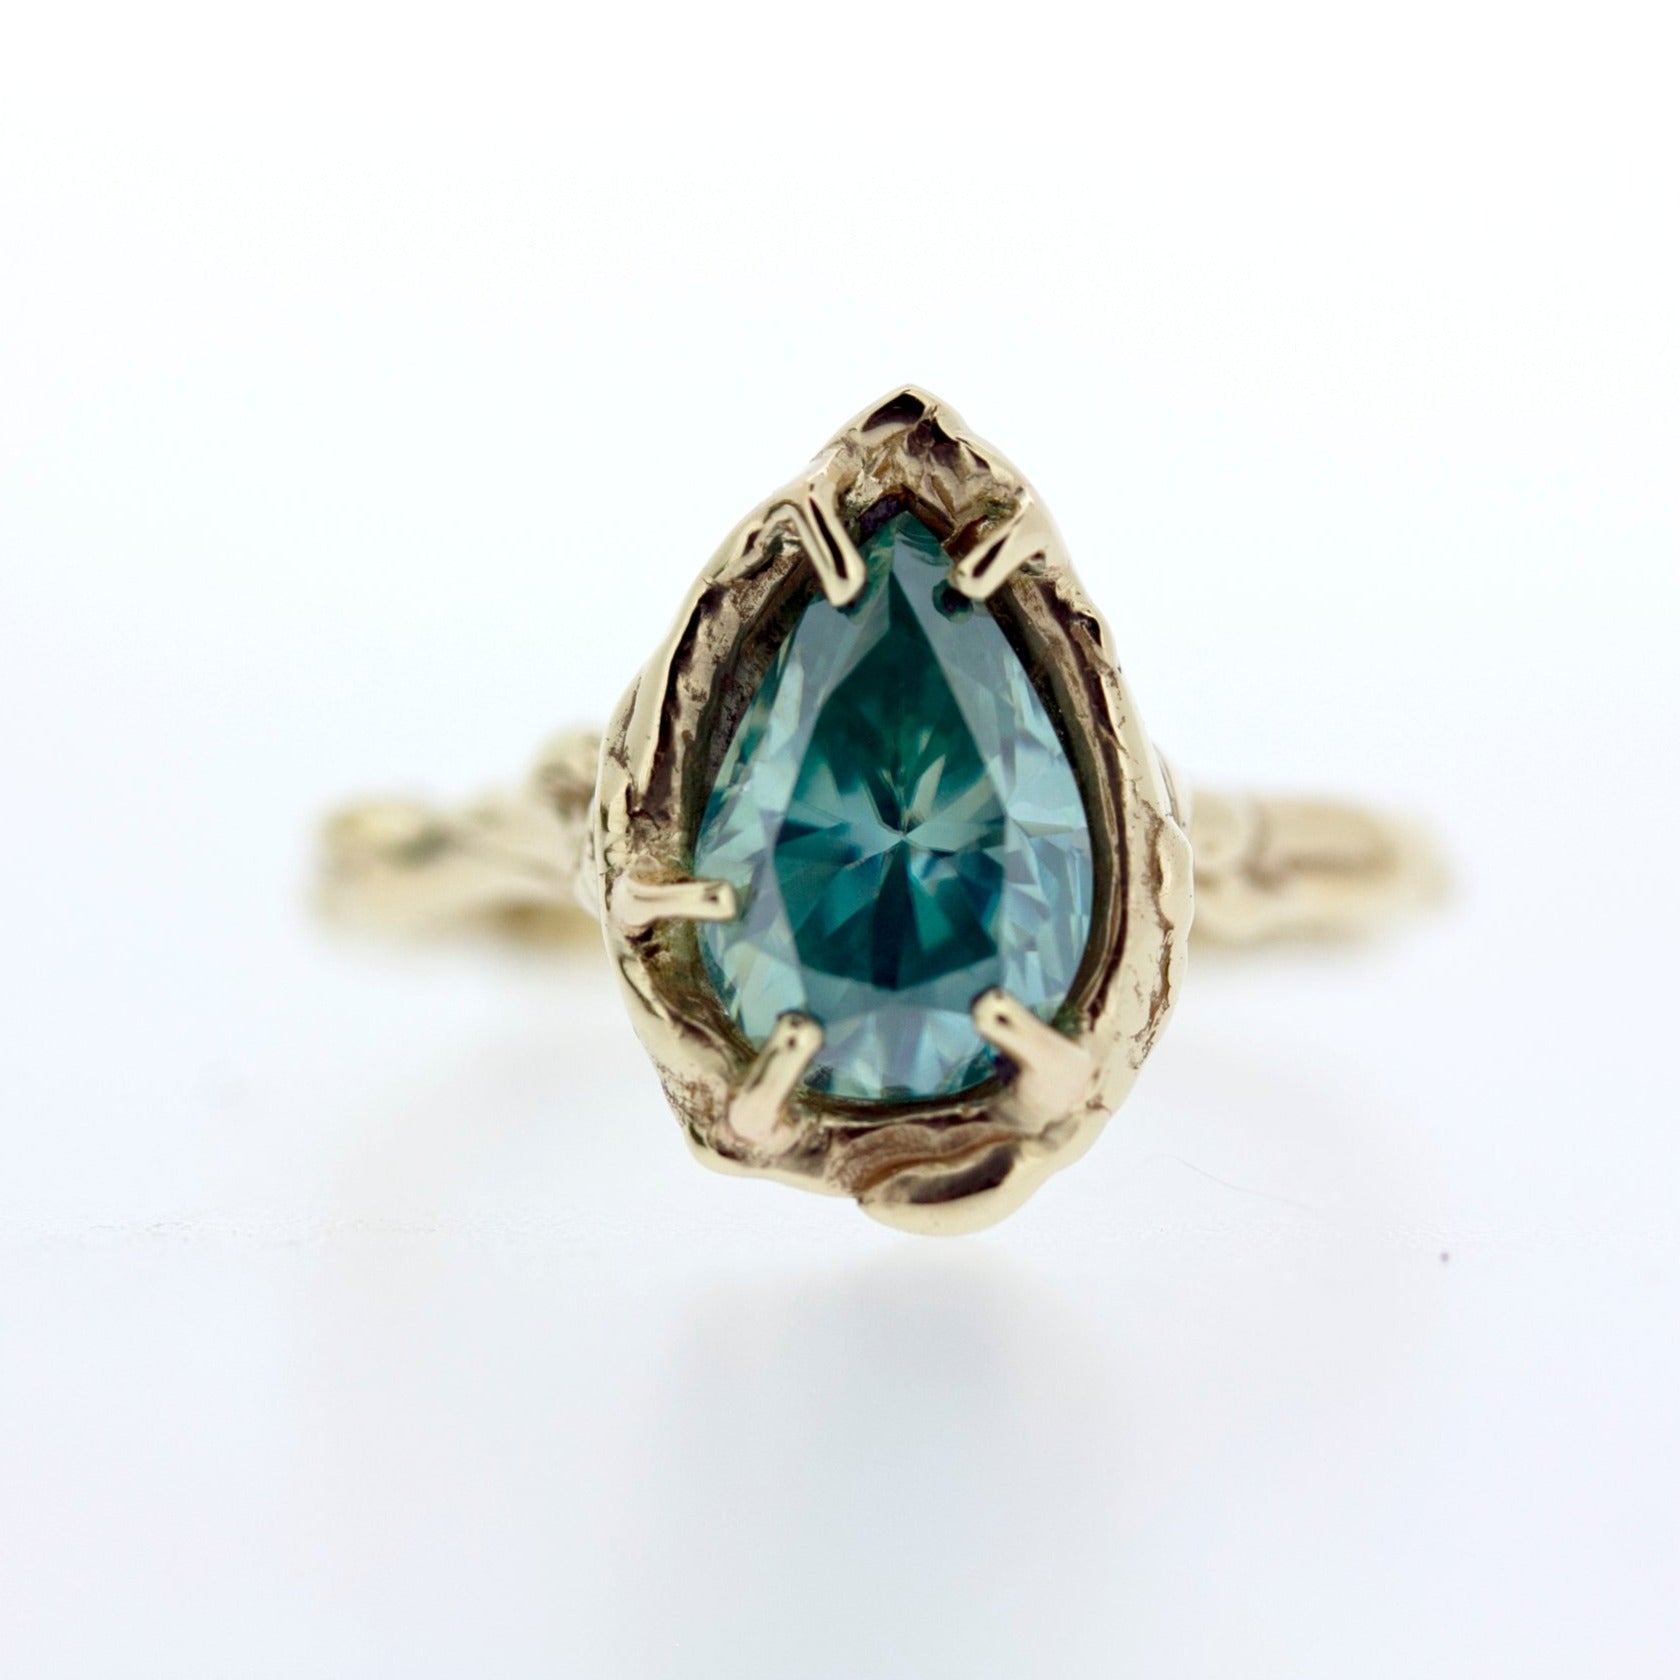 unique handmade teal moissanite engagement ring with hand wrought organic nature inspired dewdrop or water texture details